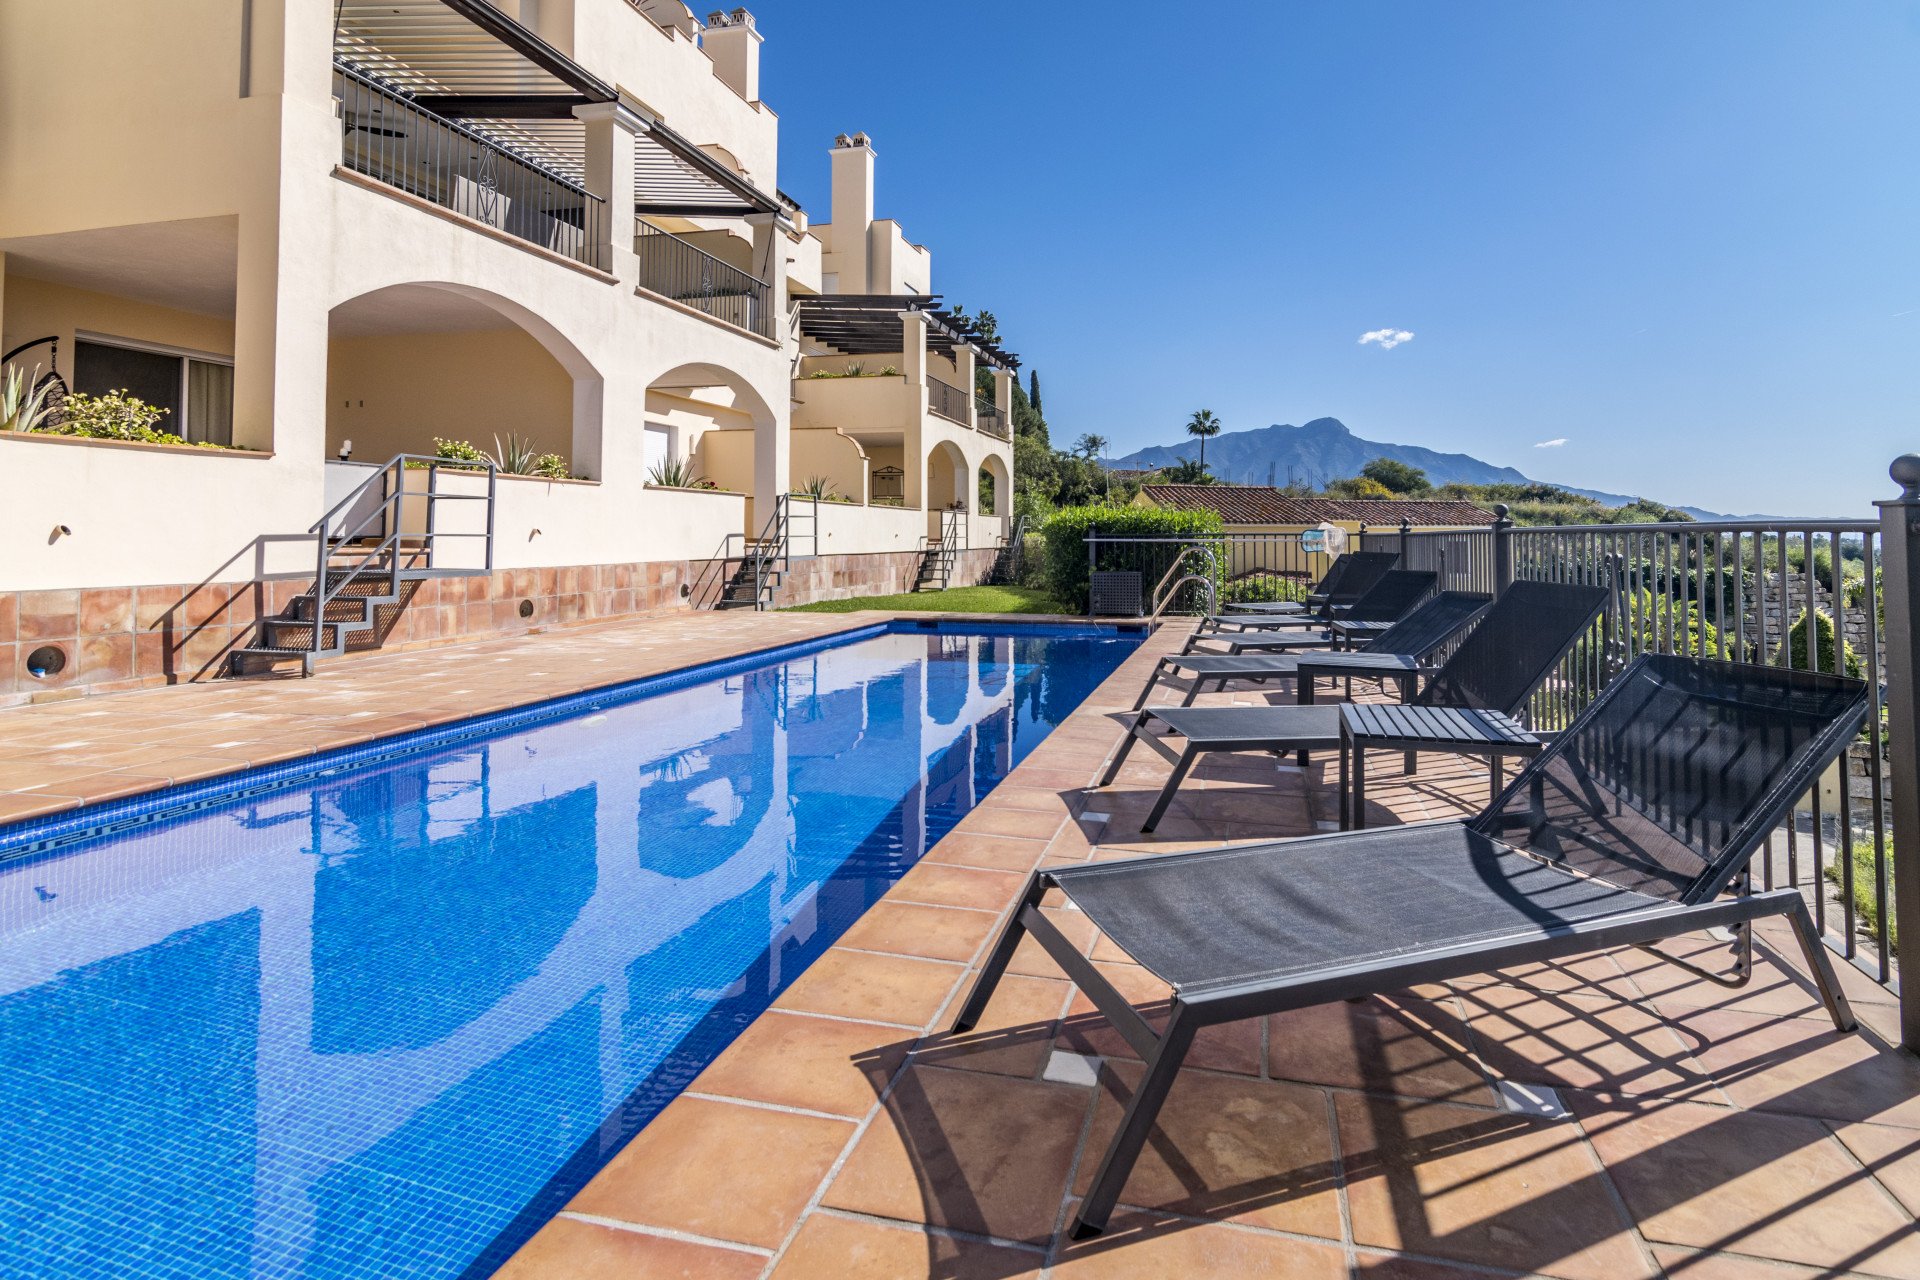 Quality duplex penthouse in Los Almendros, Benahavís with spectacular views to the Mediterranean and the coast